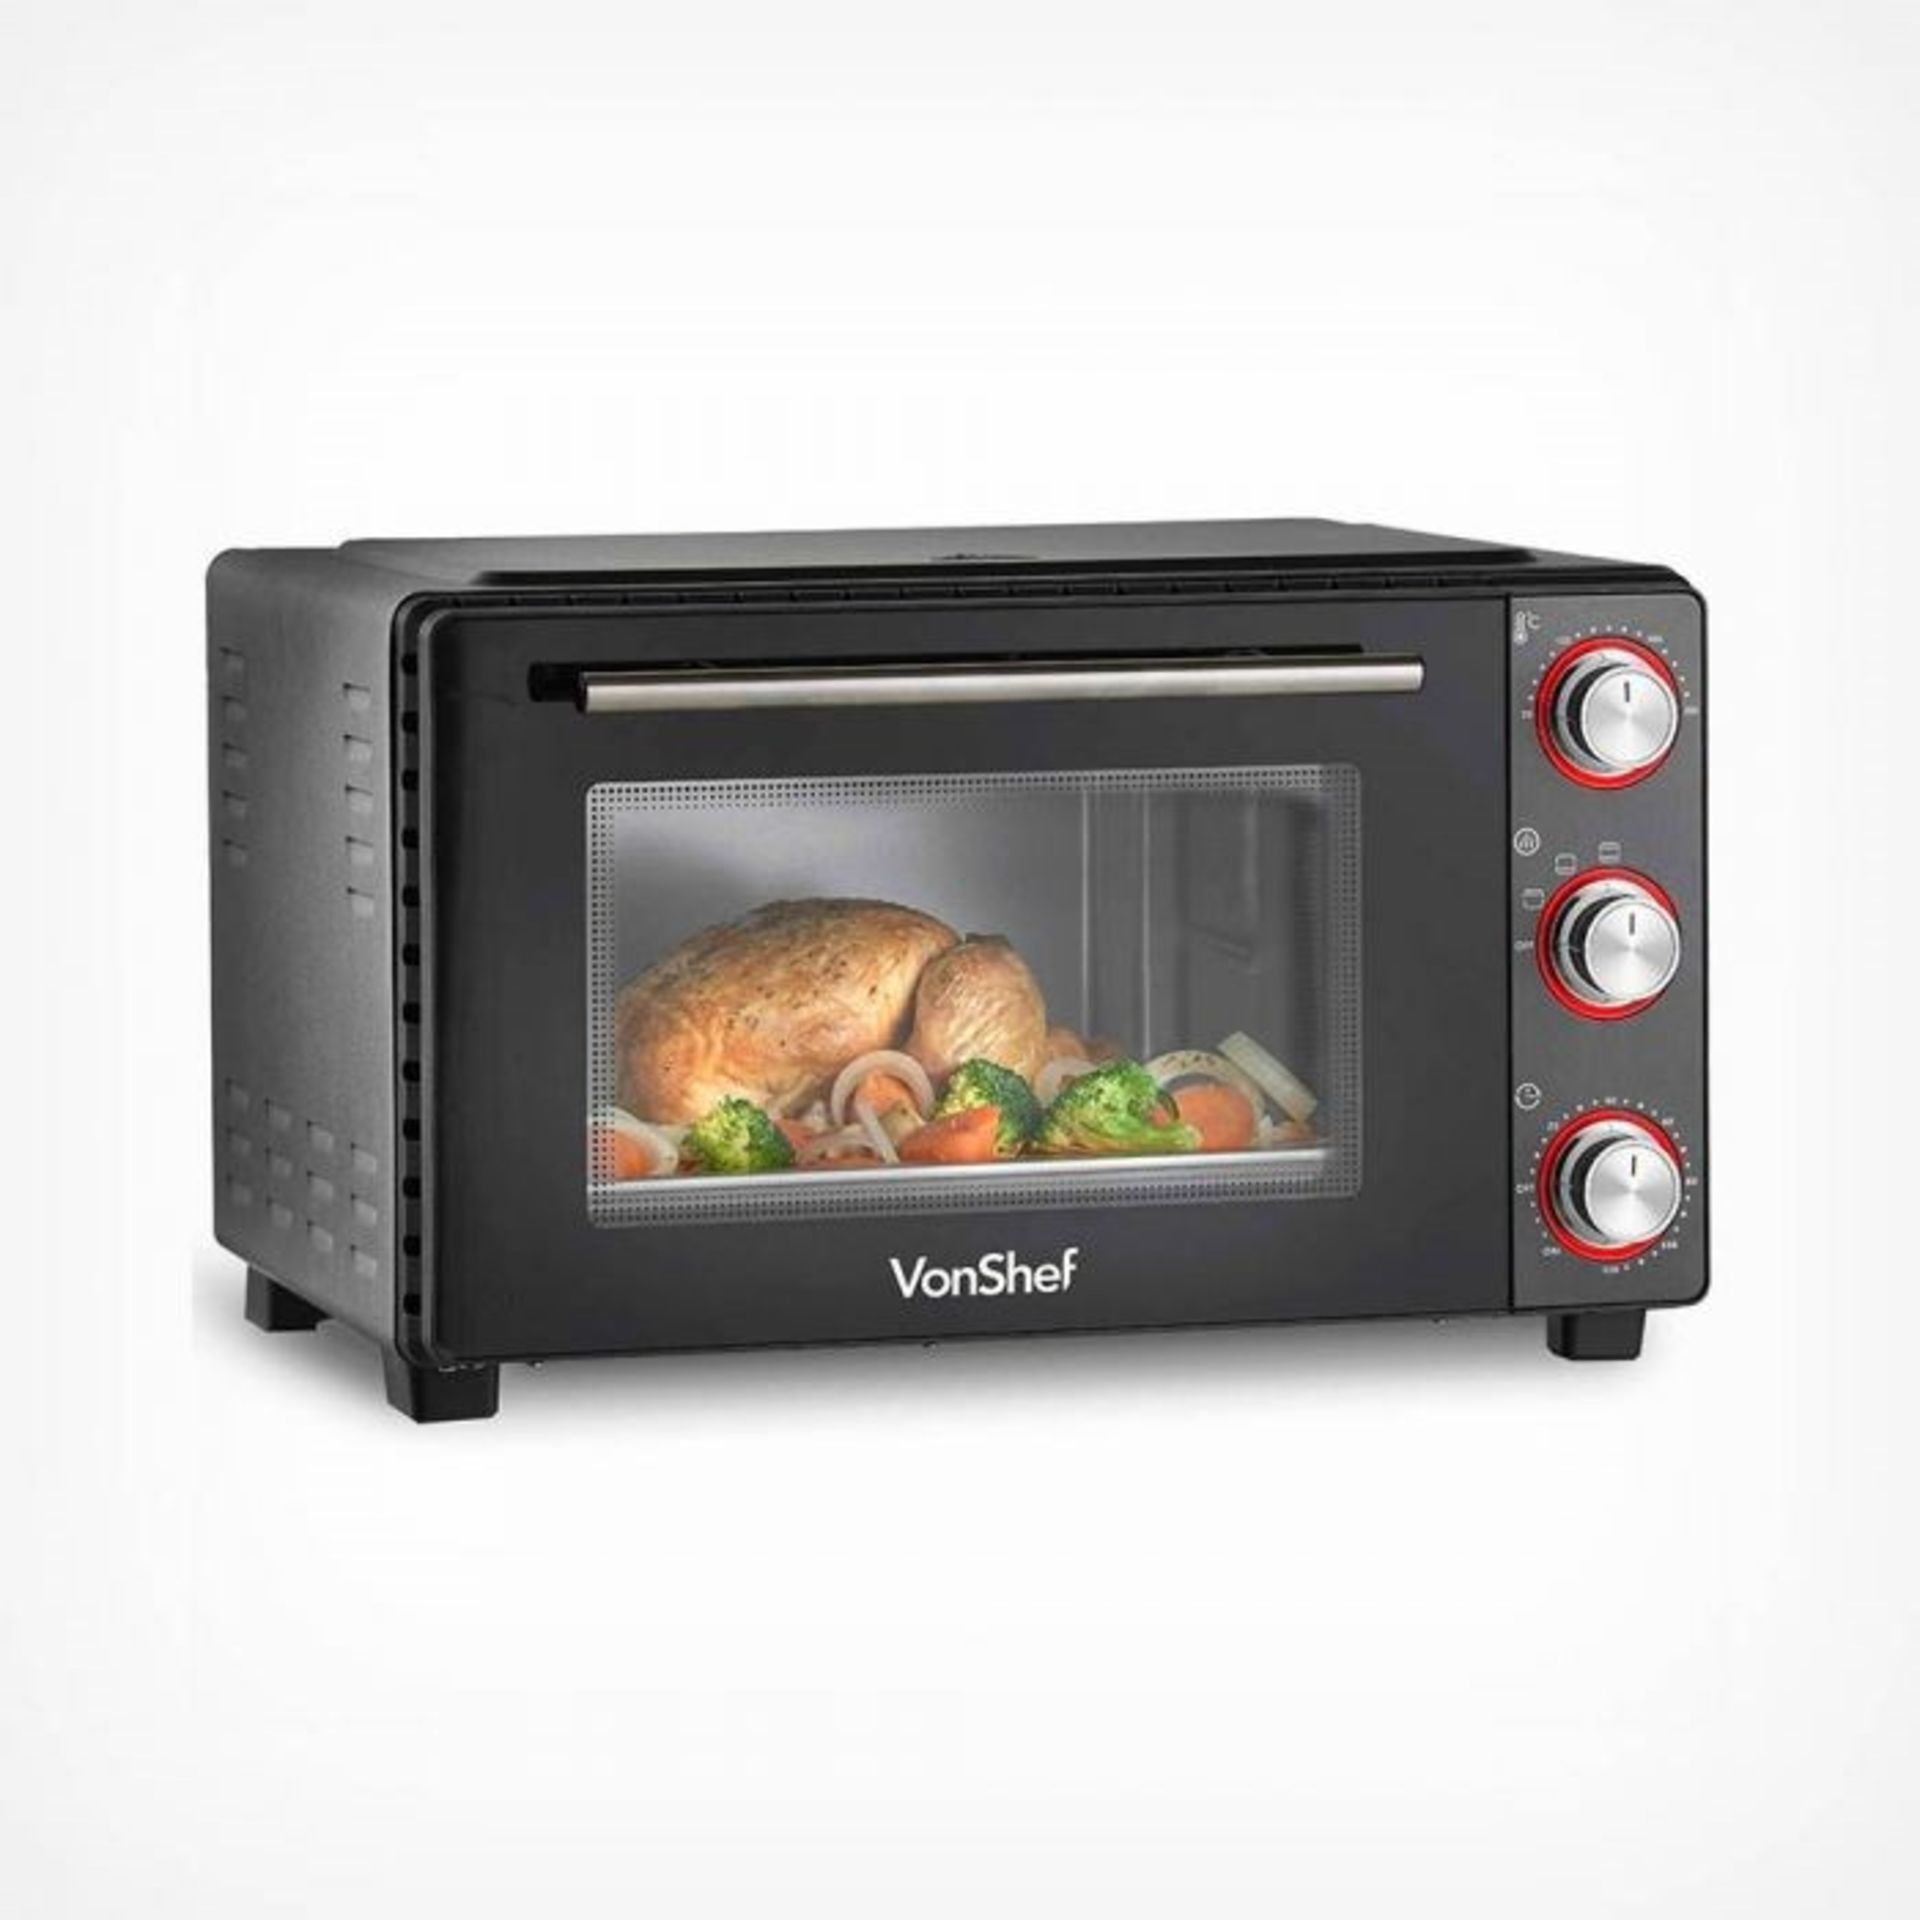 (S34) 28L Mini Oven Cooker & Grill 28L capacity and unobtrusive size makes it ideal for spaces...